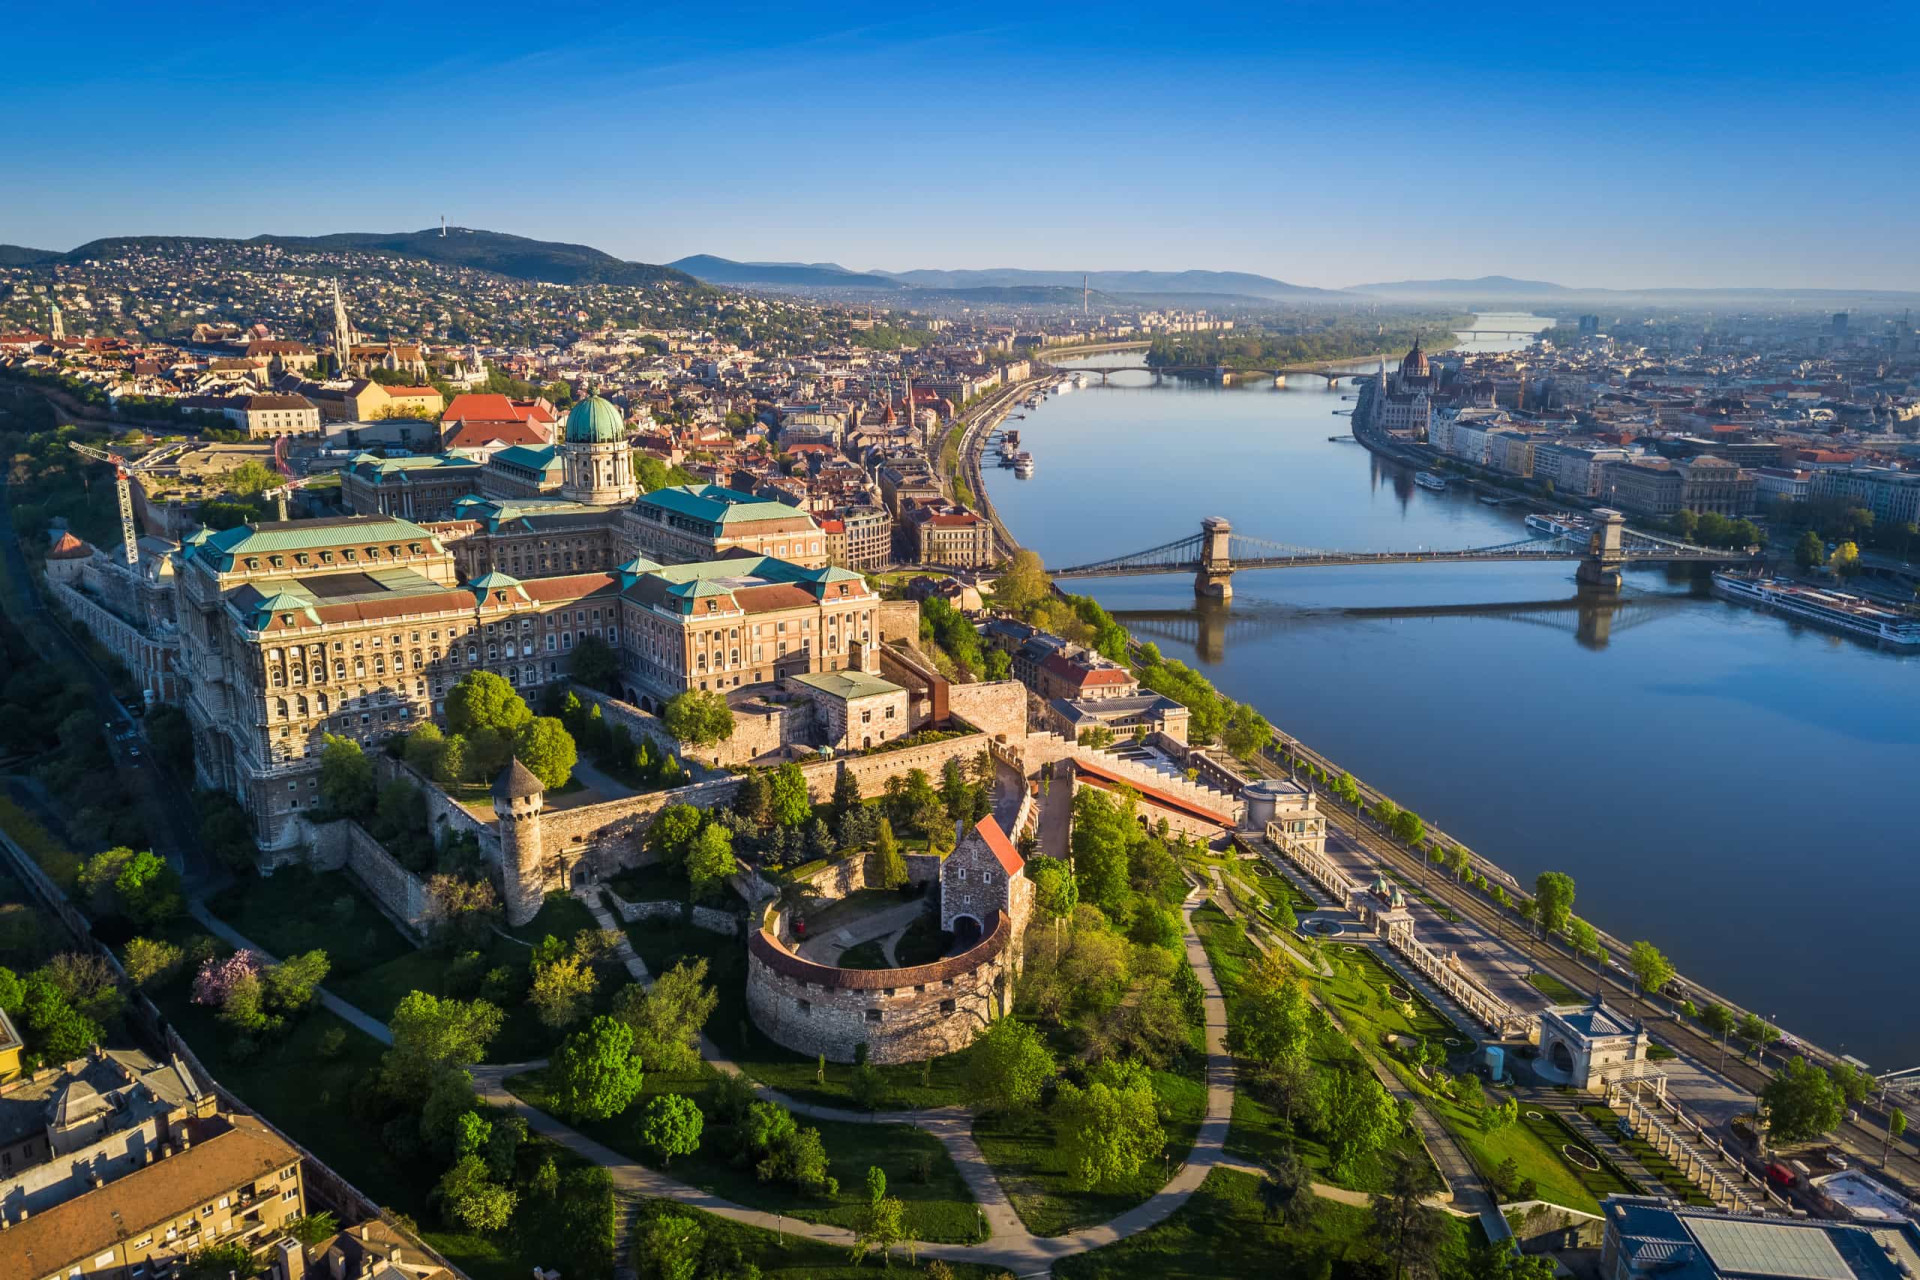 <p>With 45 minutes to spare, you would arrive at the city in which our fellow Swedish travelers ended their record-breaking journey: Budapest! Maybe you can actually enjoy this stop to its fullest!</p> <p>Sources: (Guinness World Records) (All Inclusive Outlet) (YouTube) (RecordSetter)</p> <p>See also: <a href="https://www.starsinsider.com/lifestyle/456388/world-records-that-guinness-refuses-to-accept">World records that Guinness refuses to accept</a></p><p>You may also like:<a href="https://www.starsinsider.com/n/415302?utm_source=msn.com&utm_medium=display&utm_campaign=referral_description&utm_content=701330en-us"> Home remedies and handy tips to beat the common cold</a></p>